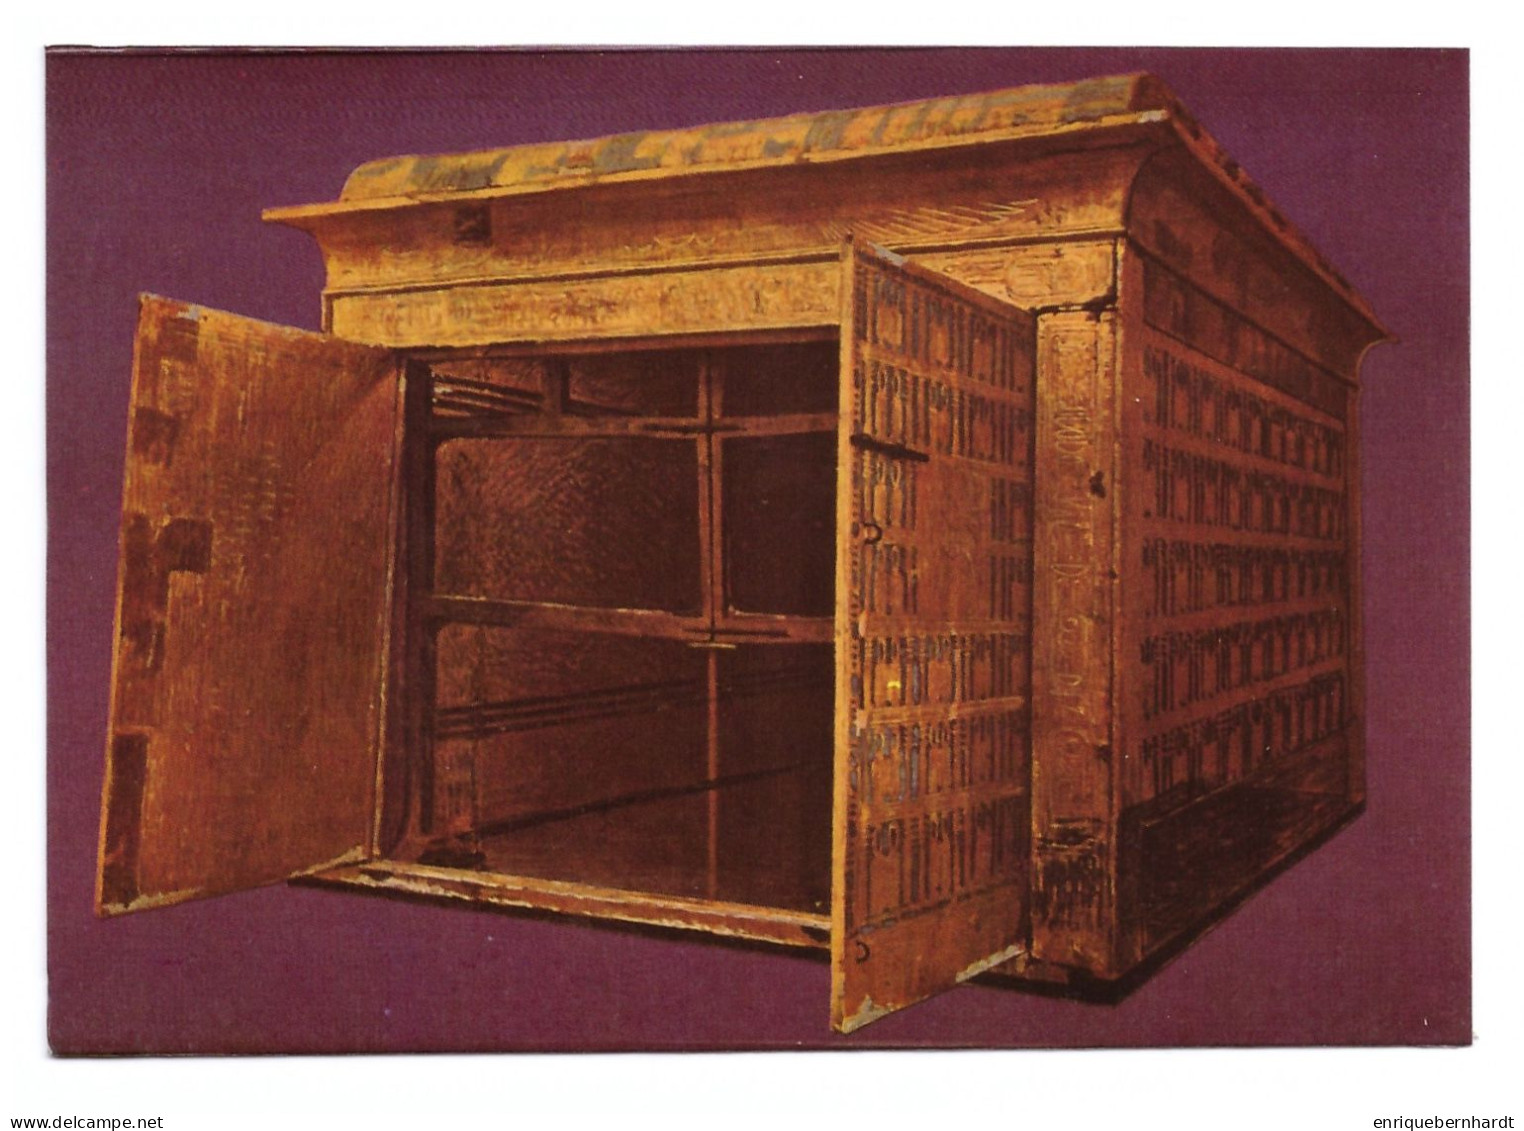 EGYPT // TUTANKHAMEN'S TREASURES - THE FIRST GREAT SHRINE OF WOOD COVERED WITH GILT STUCCO - Museos